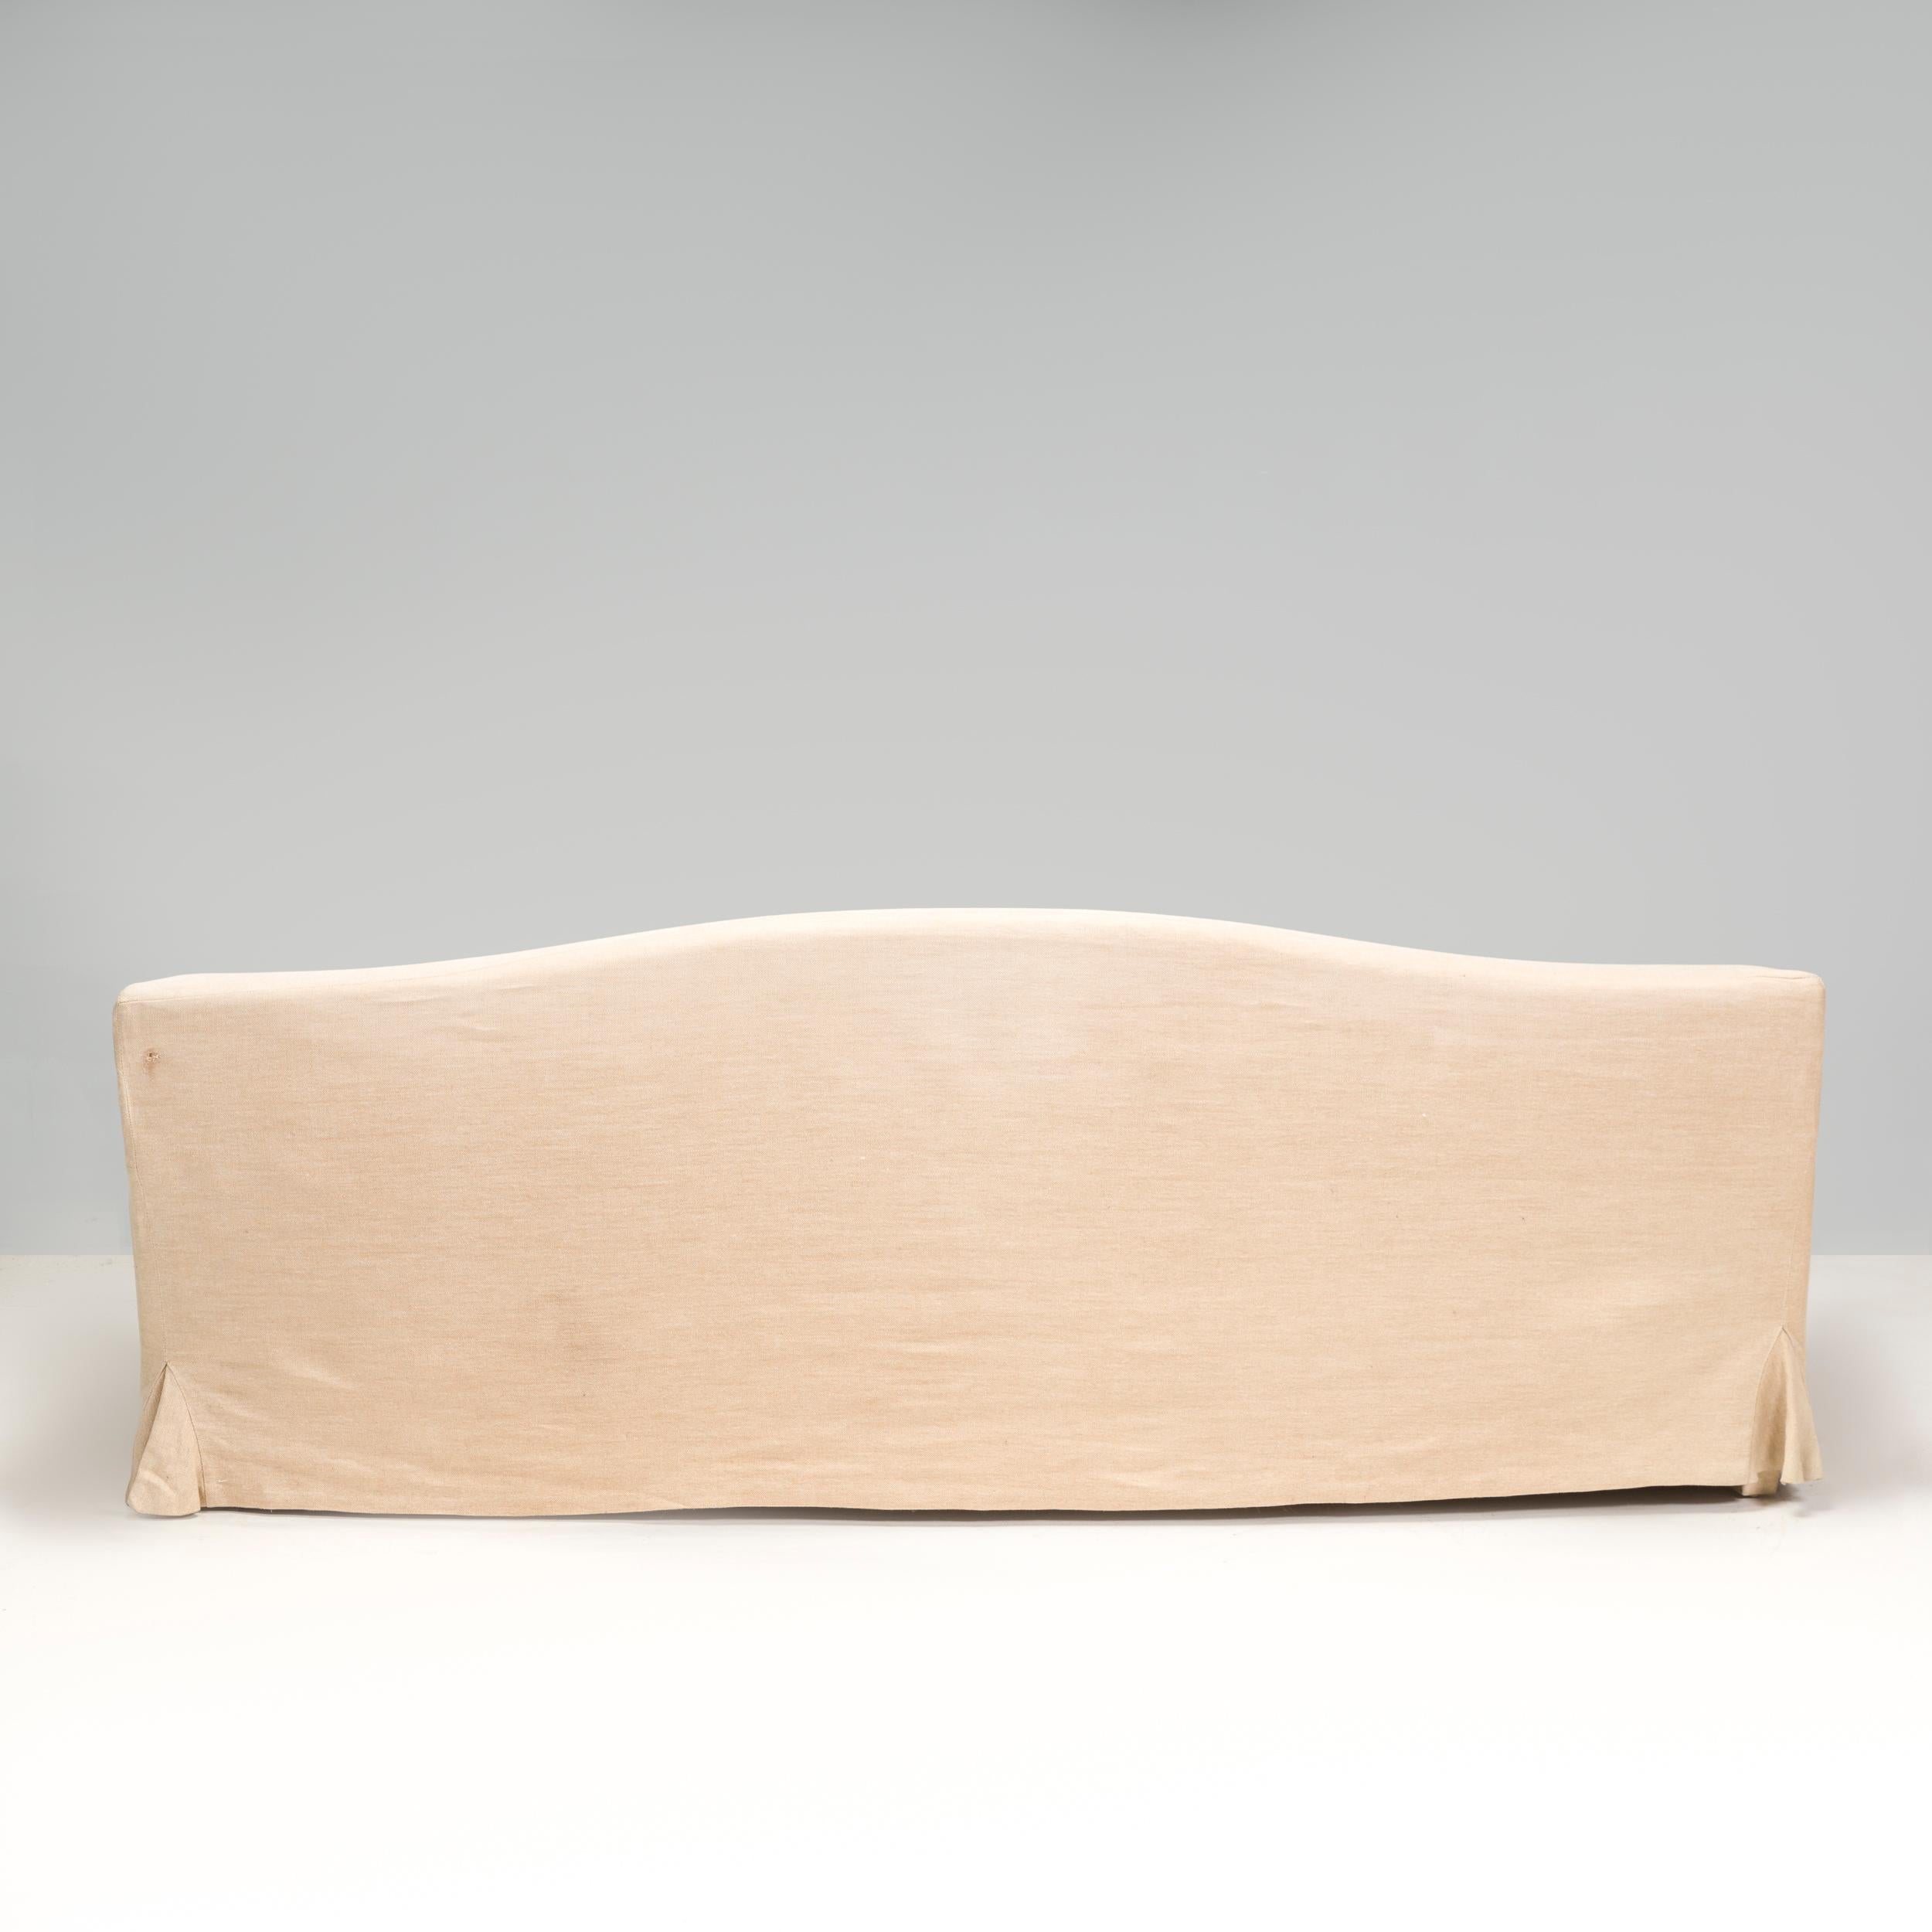 Christian Liaigre for Holly Hunt Basse Terra Beige Linen Slipcover Sofa In Distressed Condition For Sale In London, GB